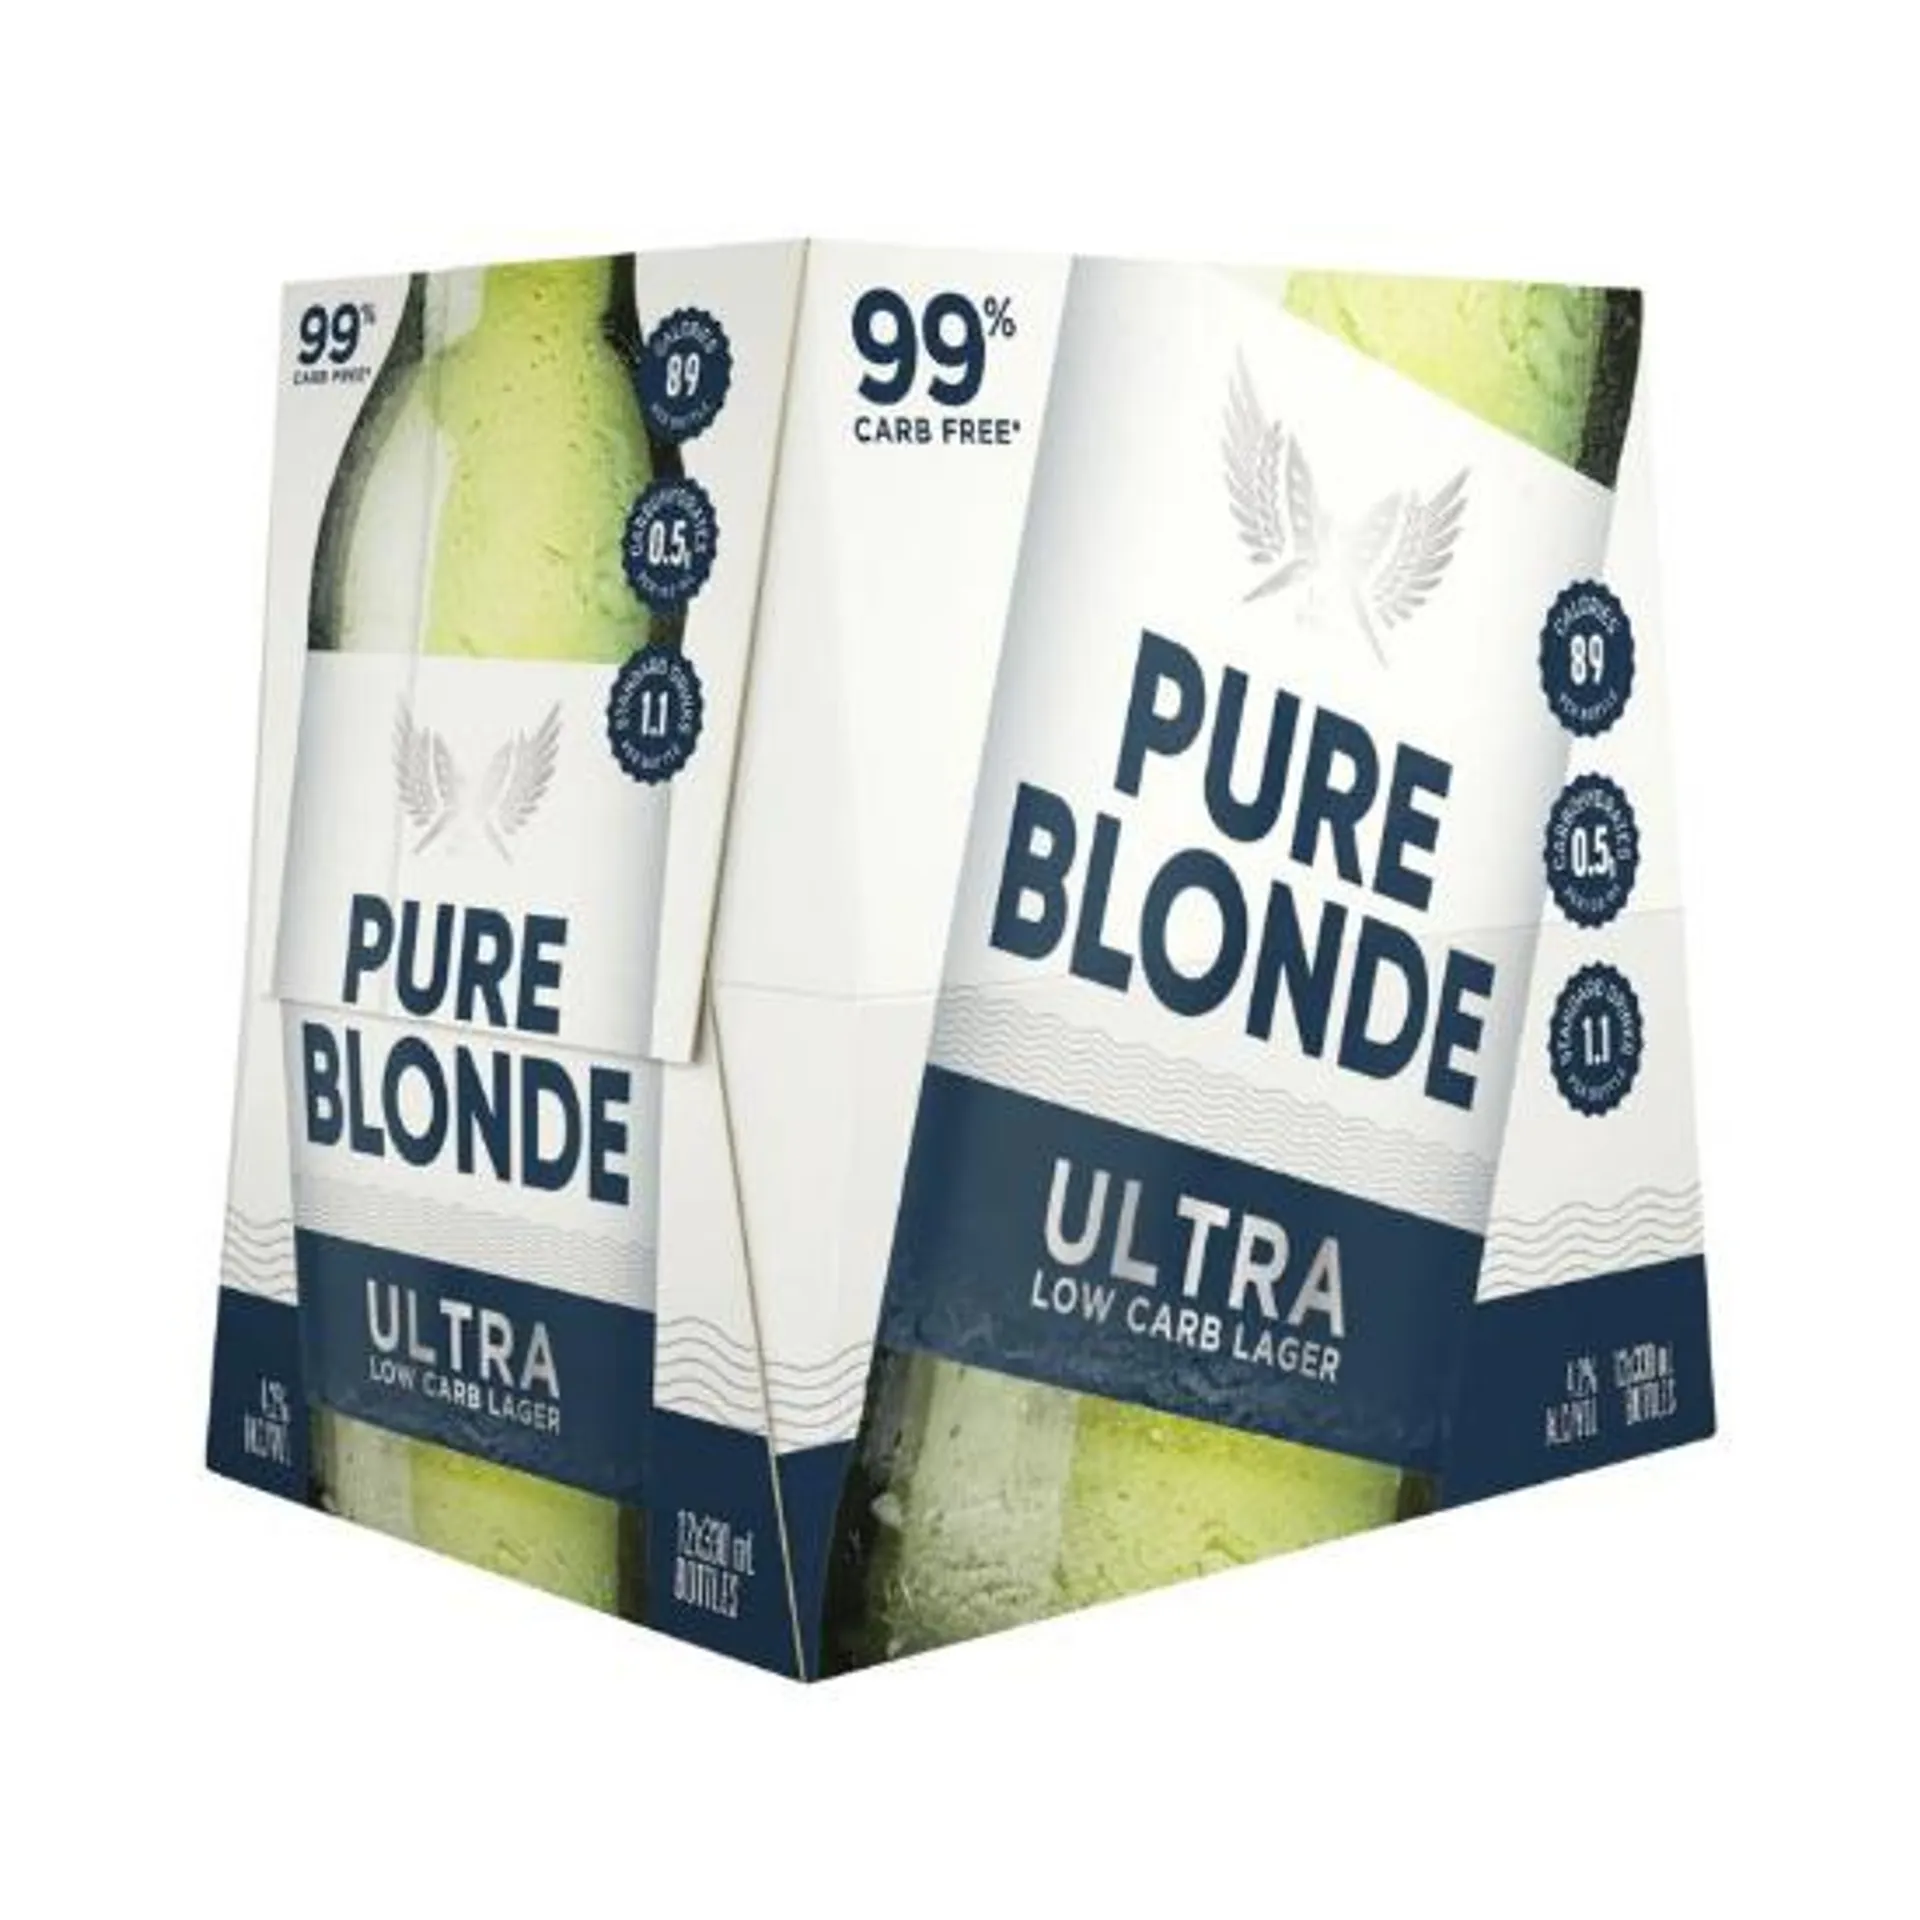 Pure Blonde Ultra Low Carb Lager Bottles 12x330ml